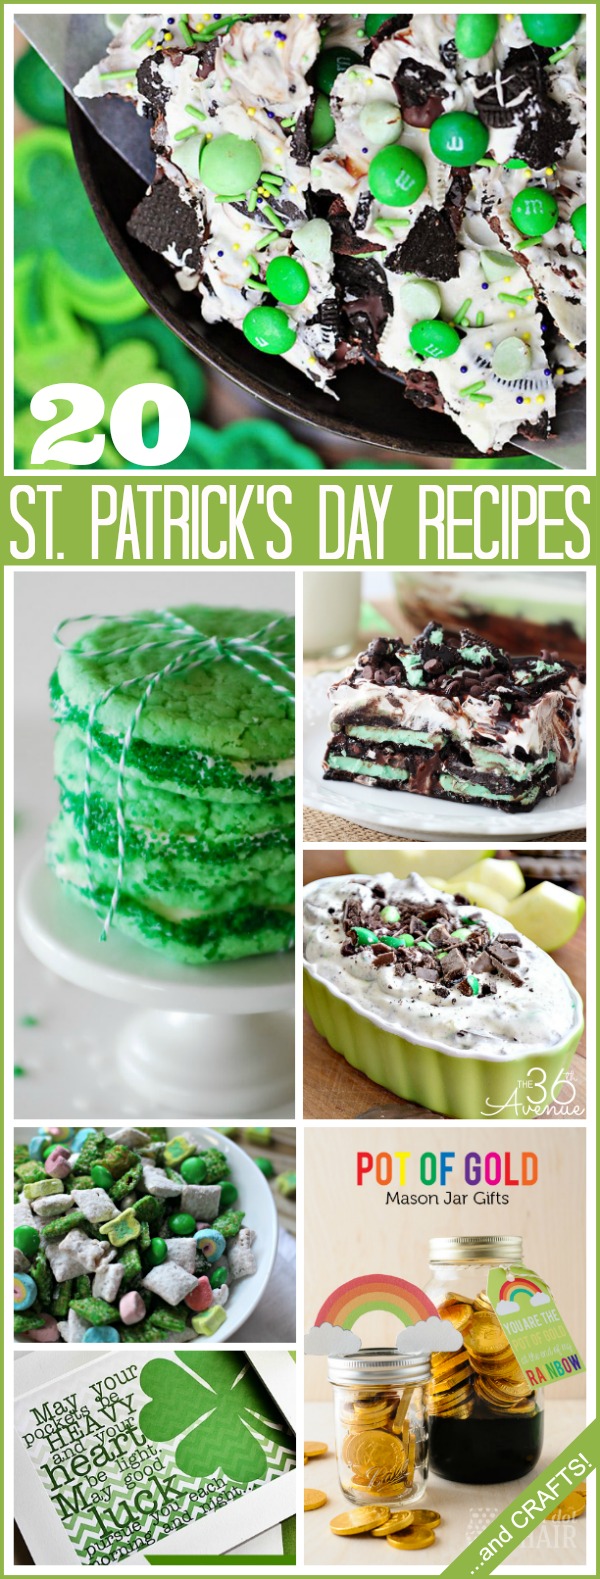 20 Delicious St. Patrick's Day Recipes and Ideas... Yummy and cute! 